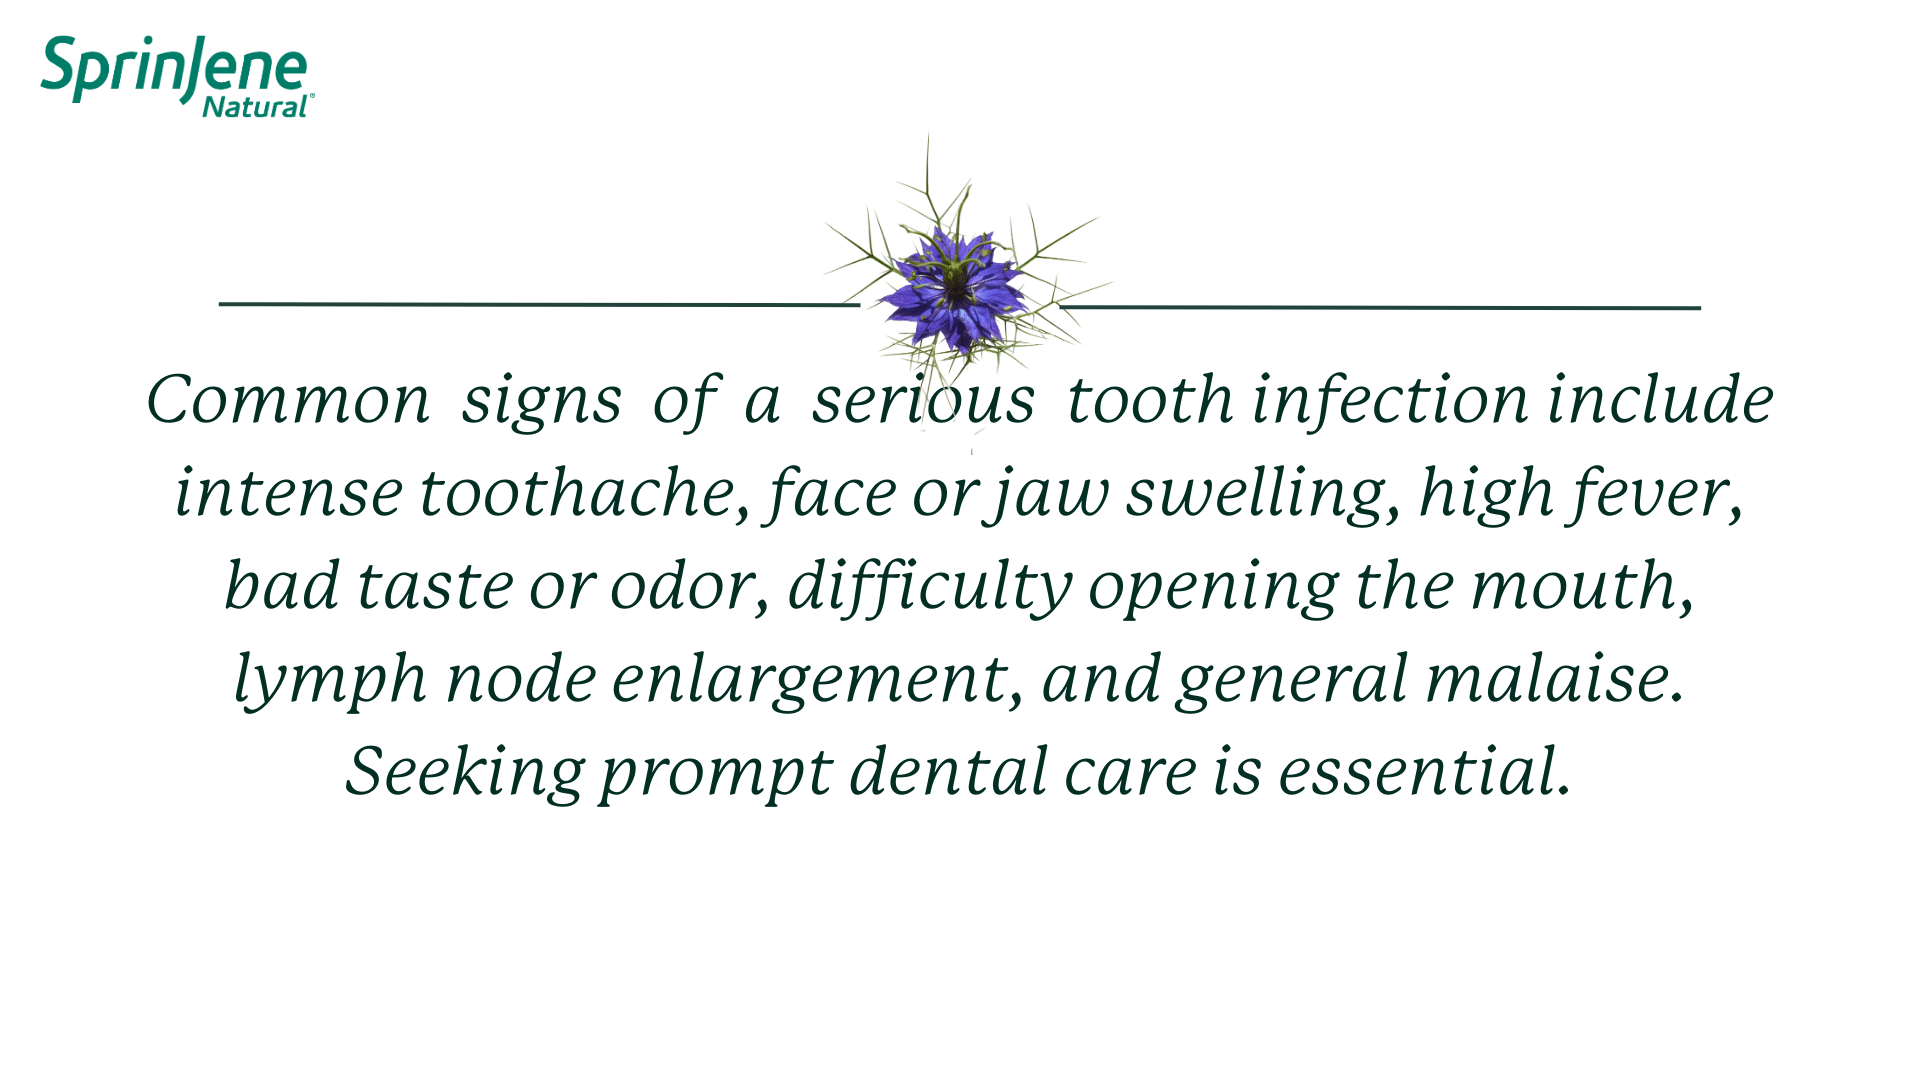 Common  signs  of  a  serious  tooth infection include intense toothache, face or jaw swelling, high fever, bad taste or odor, difficulty opening the mouth, lymph node enlargement, and general malaise. Seeking prompt dental care is essential.